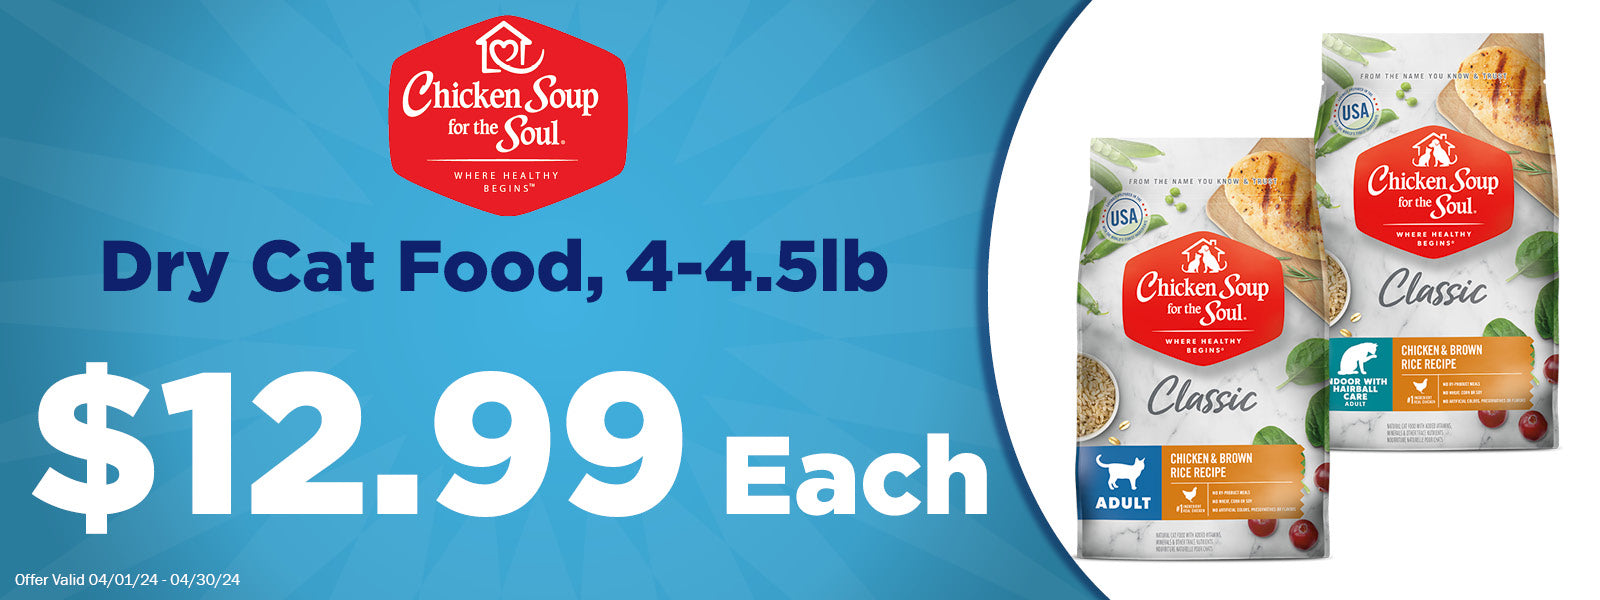 Chicken Soup For the Soul Dry Cat Food 4-5lb $12.99